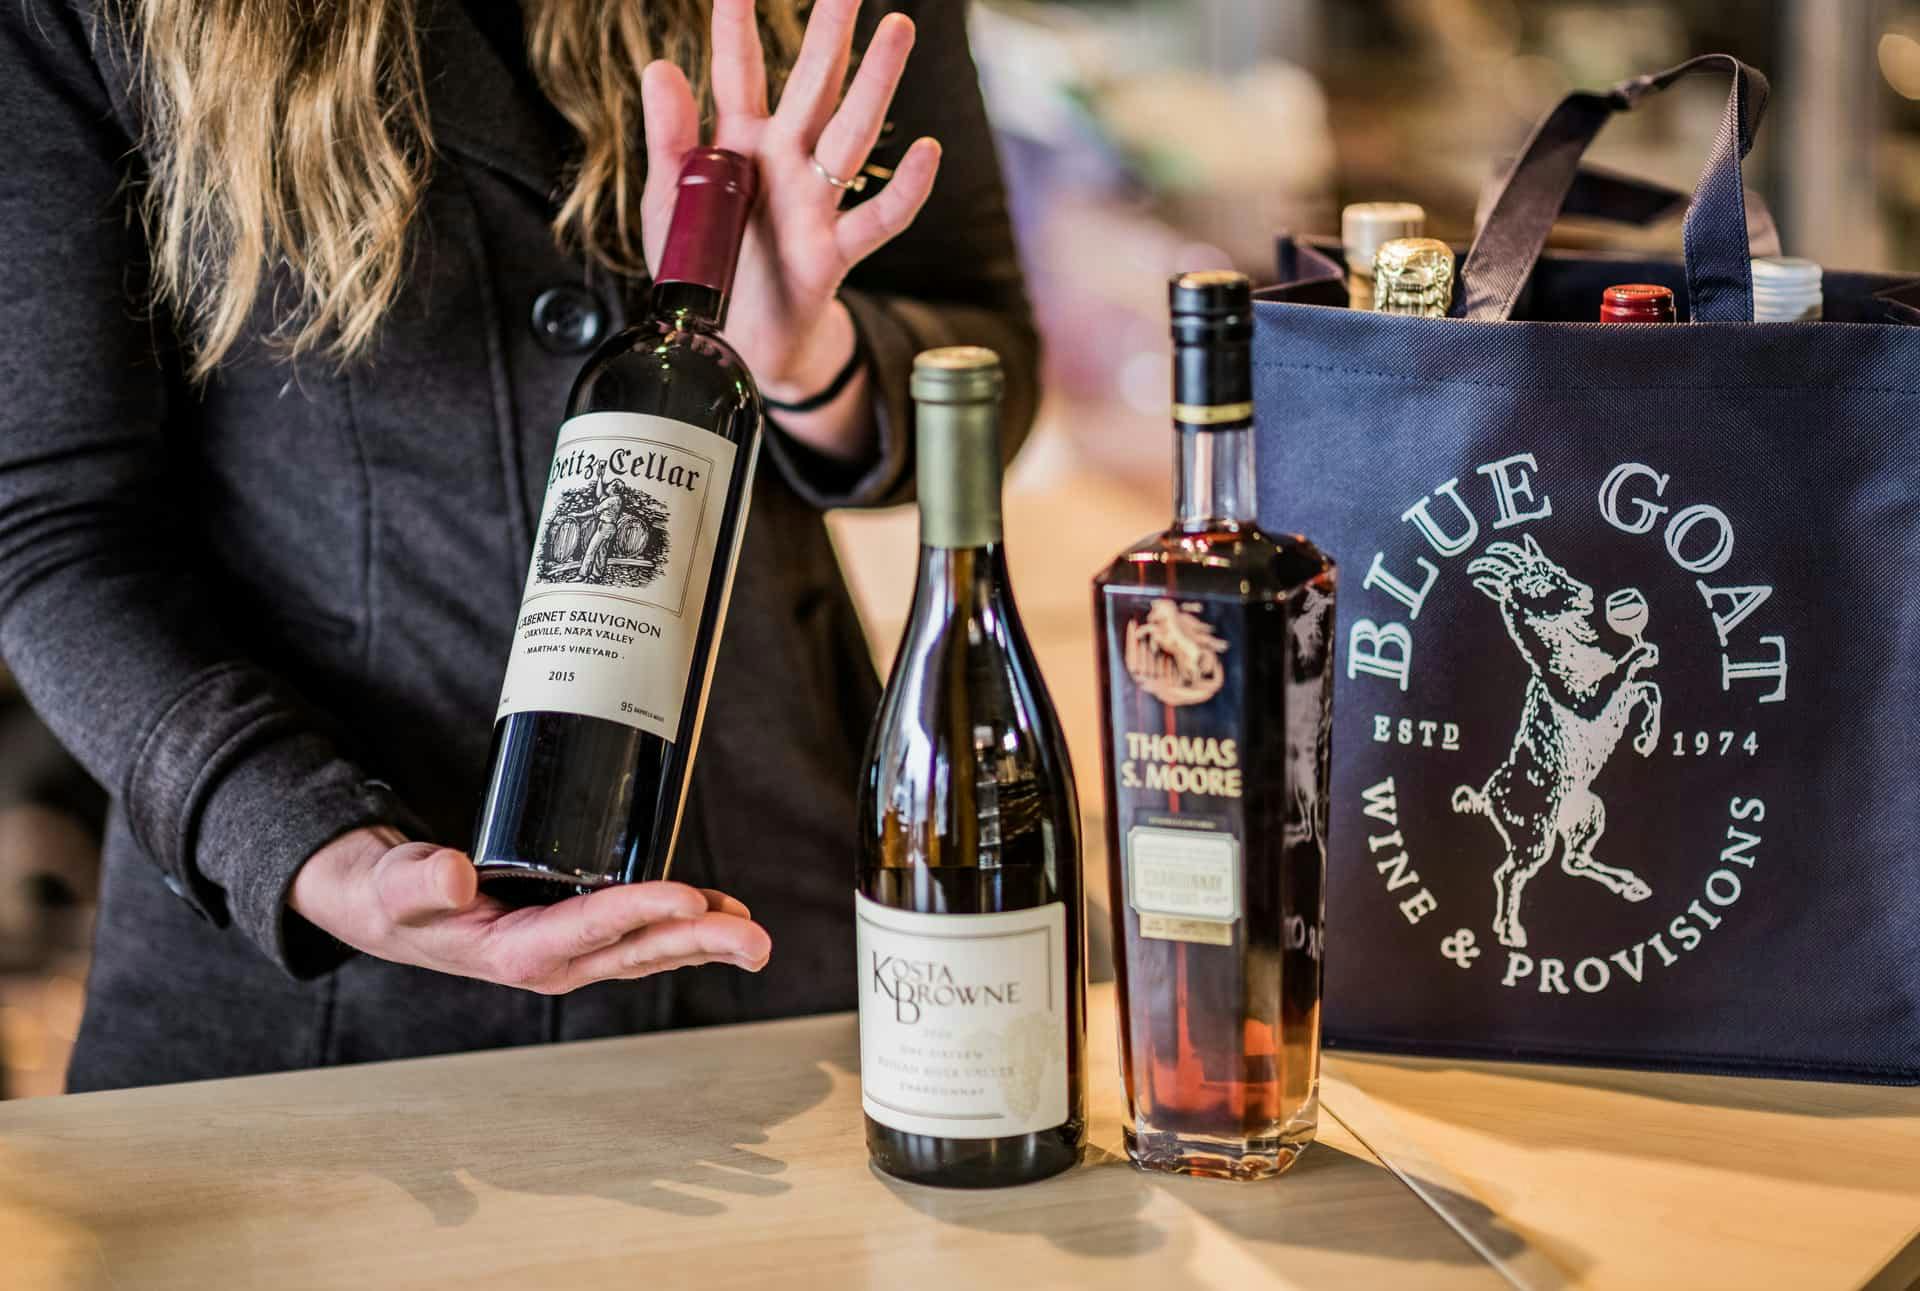 An employee presenting a bottle of wine out of a Blue Goat branded tote bag.